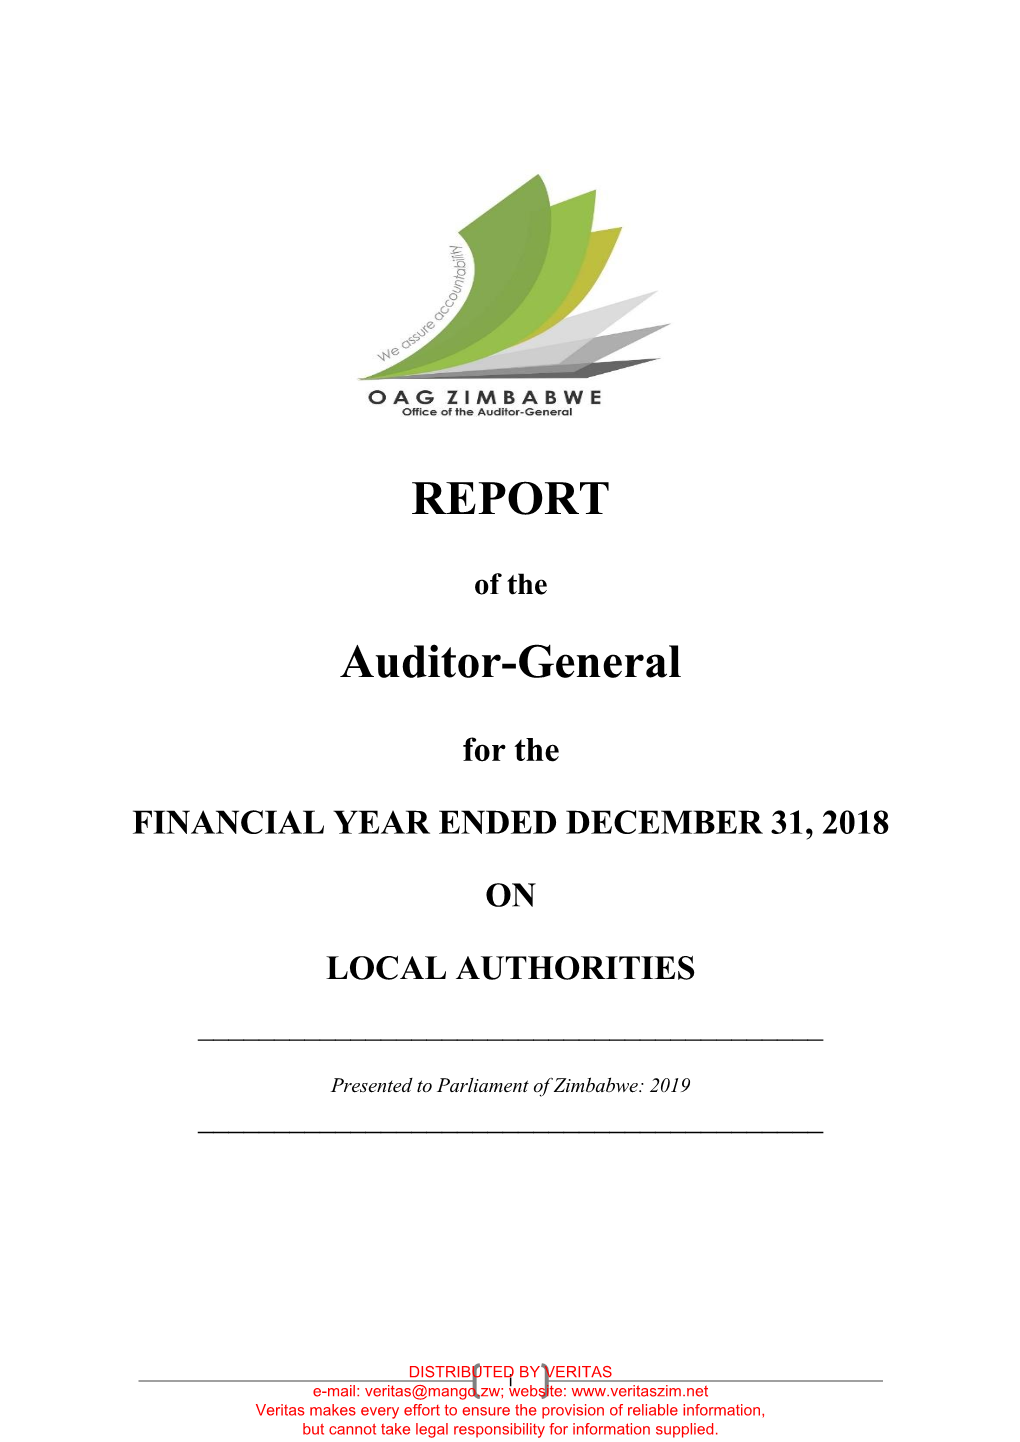 Ags Report on Local Authorities 2018.Pdf